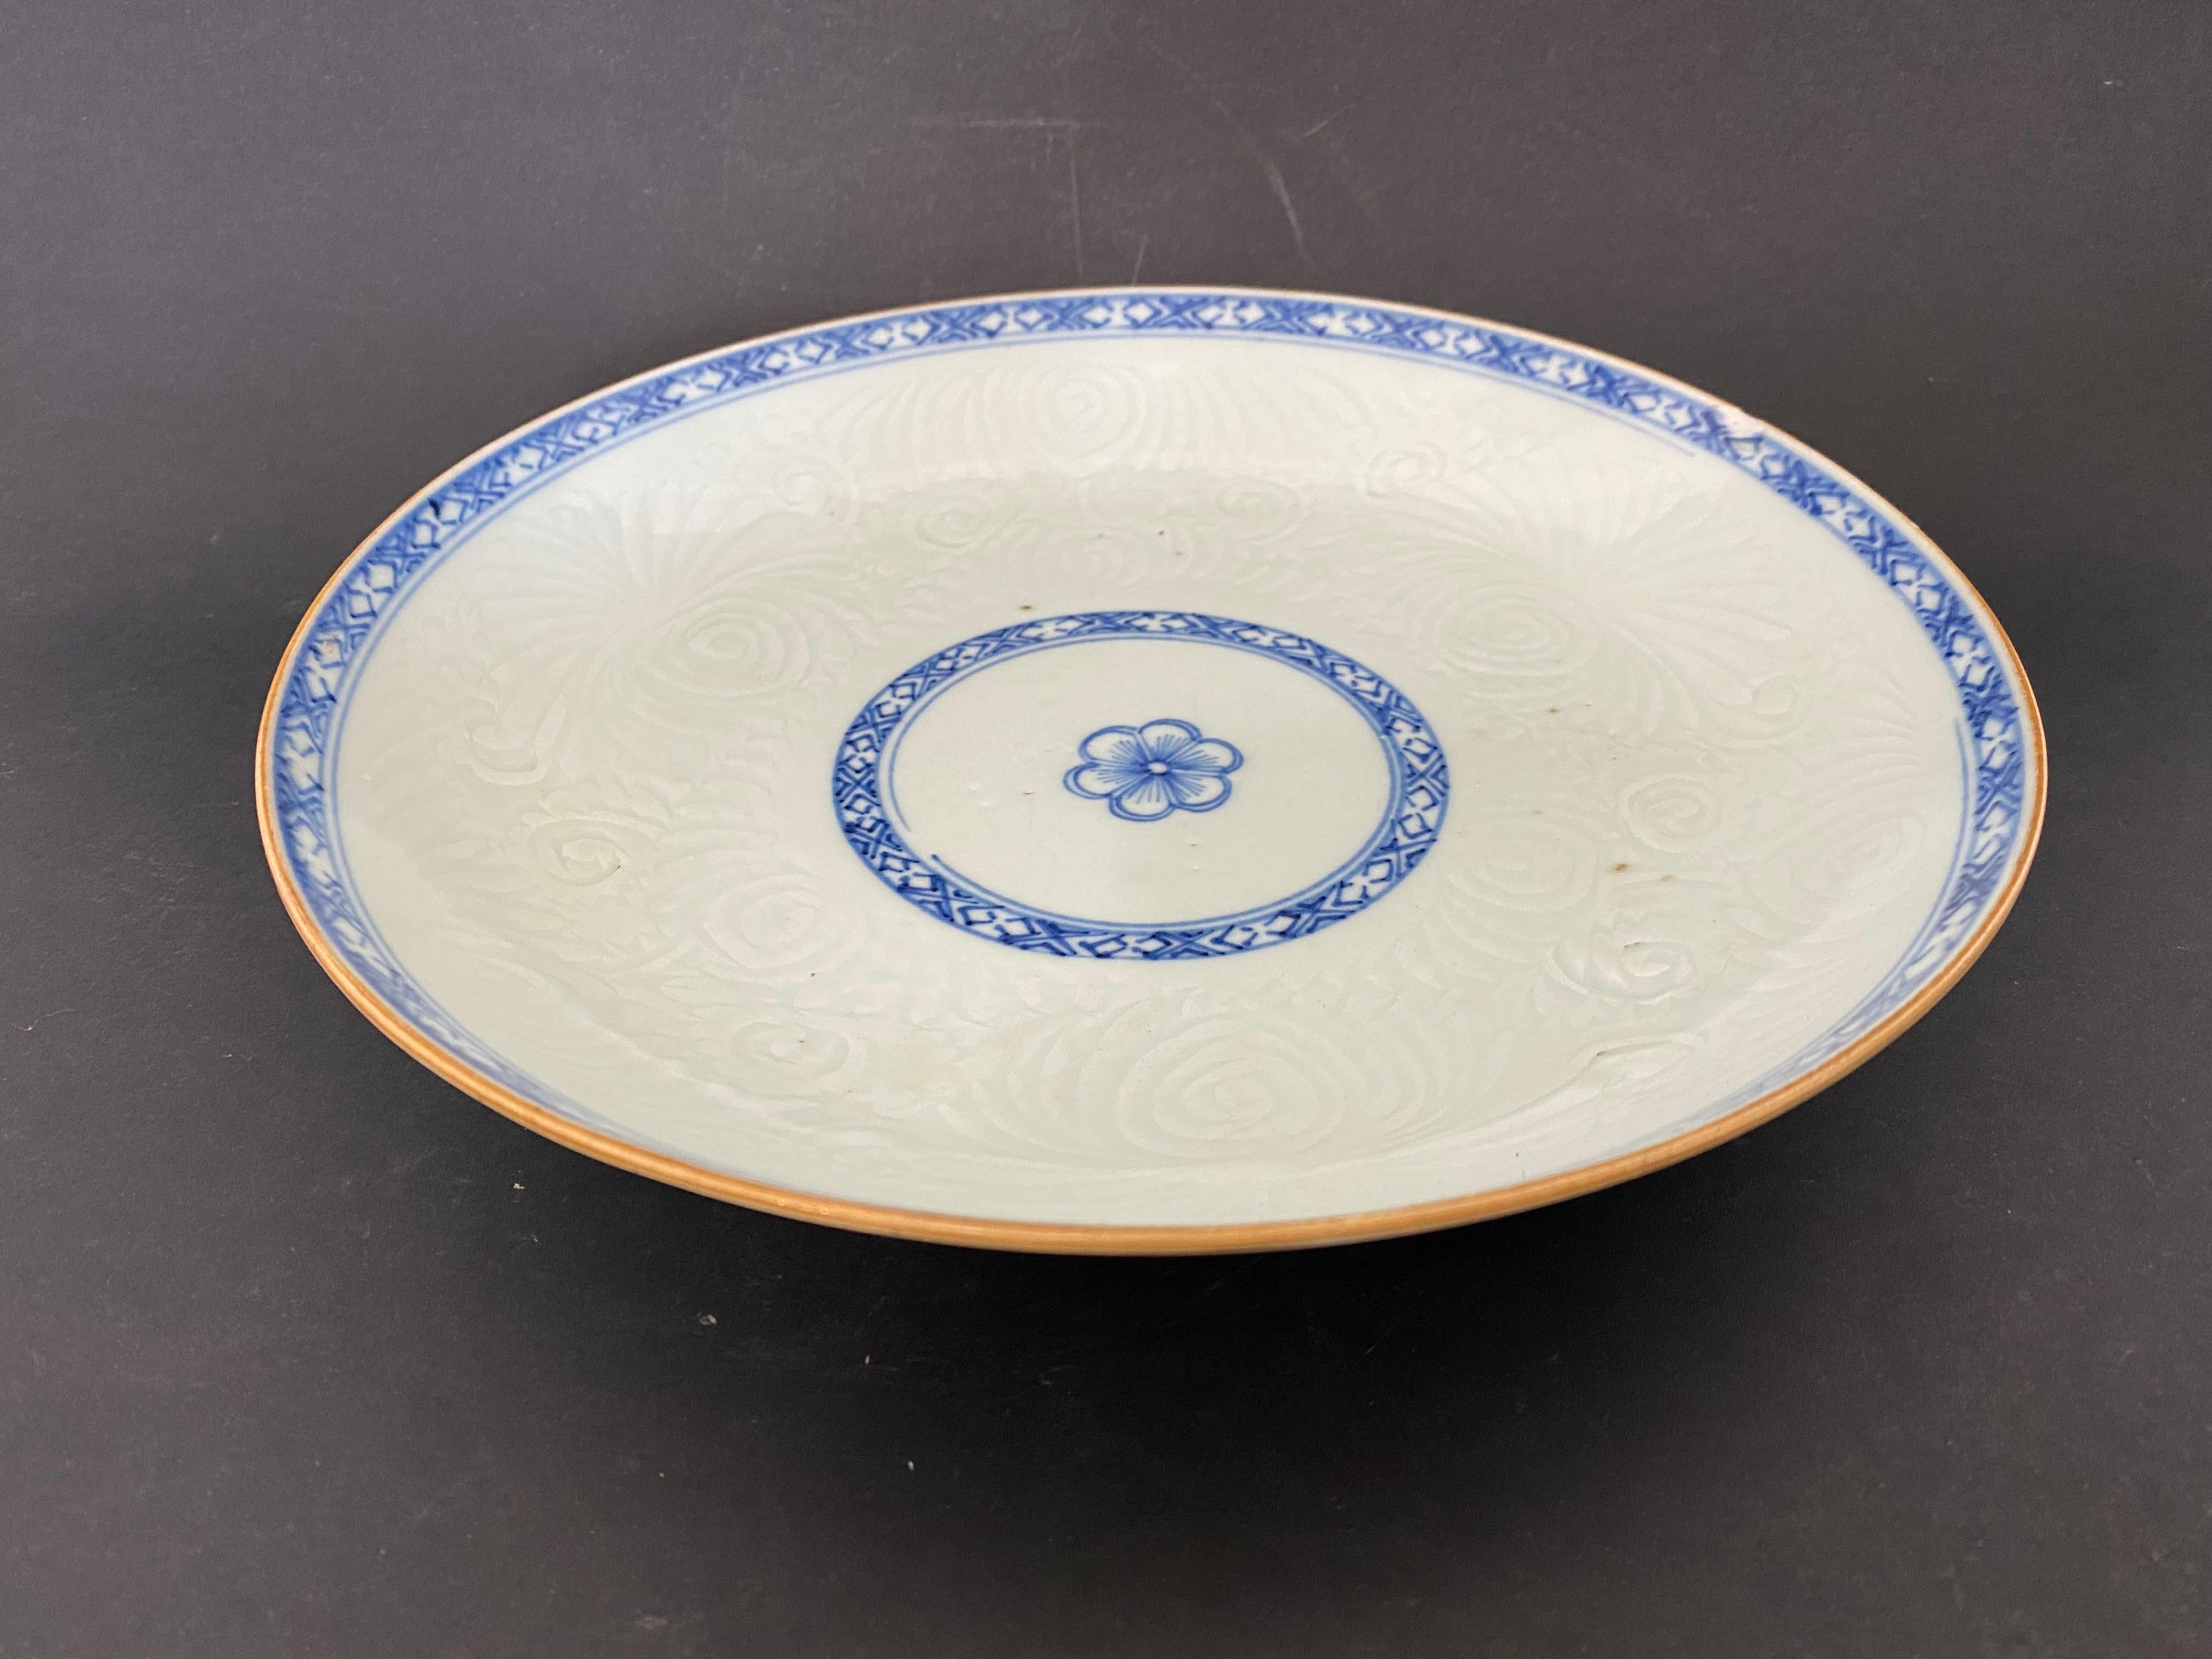 Beautiful plate inspired by the Company of India of the Qianlong period, 18th century, but dating from the 19th century. This porcelain soup plate, with a flower represented in the center surrounded by a cobalt colored vegetal frieze. Later,